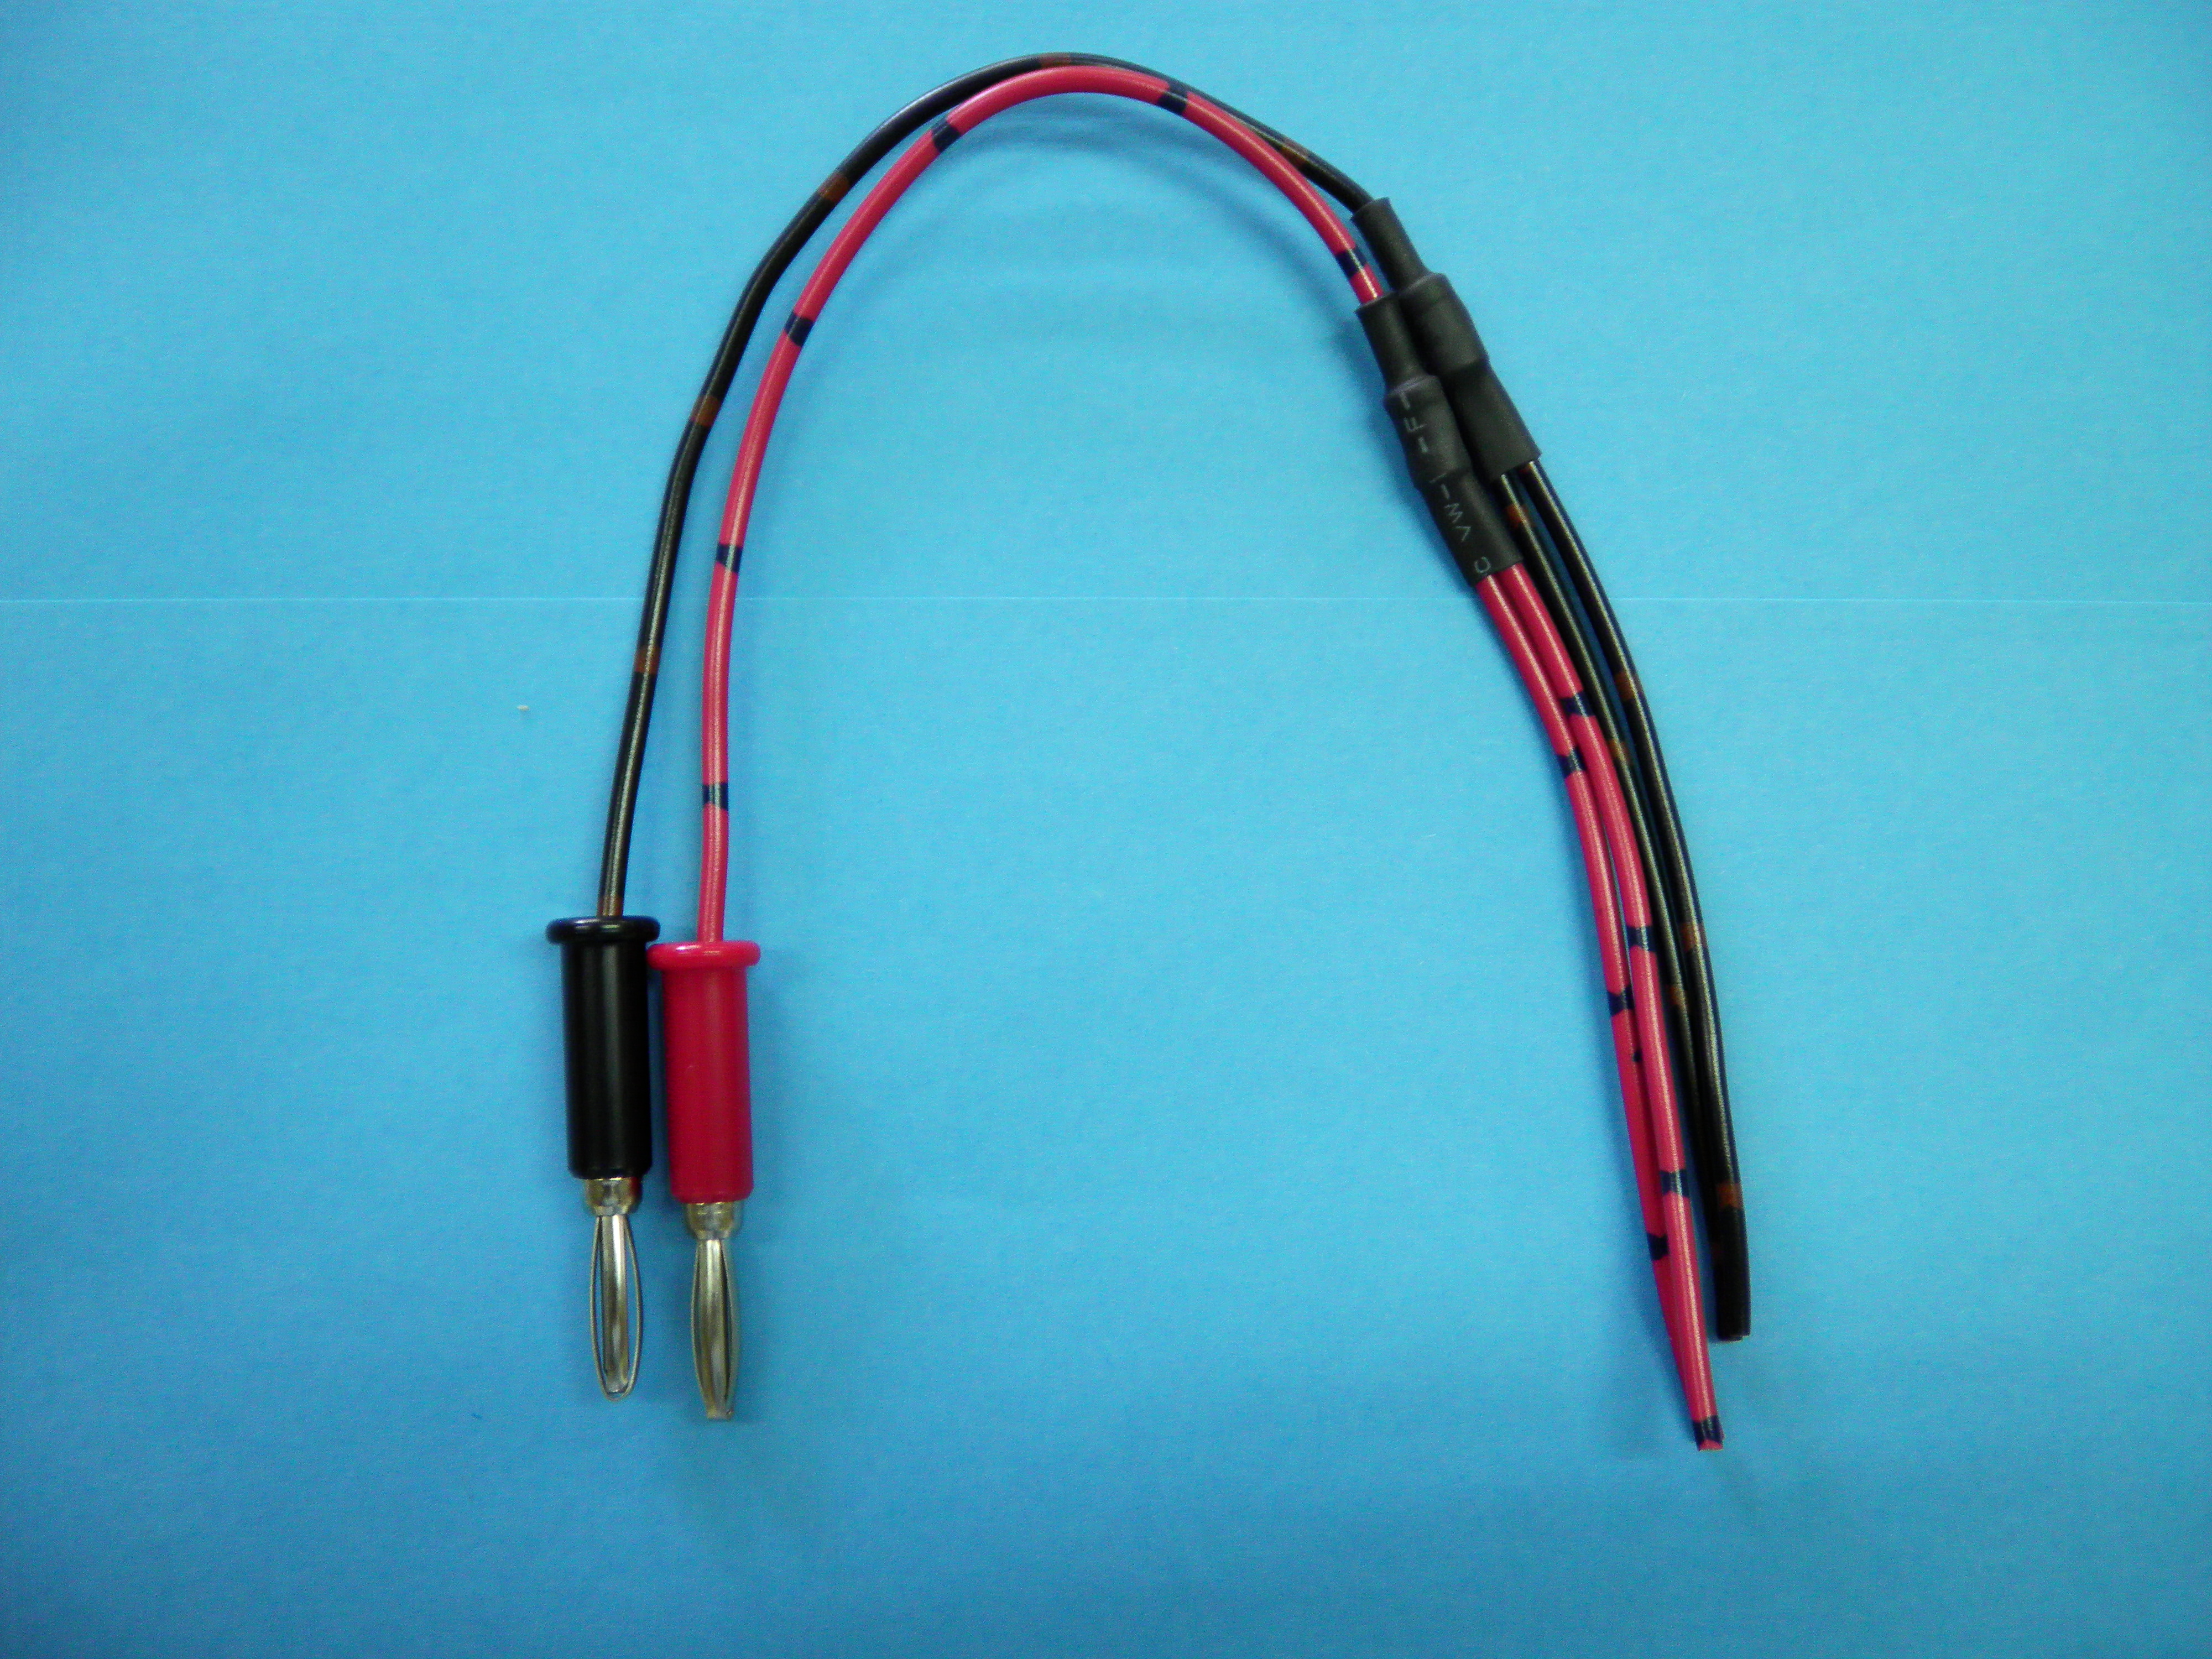 http://www.cable-harness-ex.com/case/SANY0009.JPG